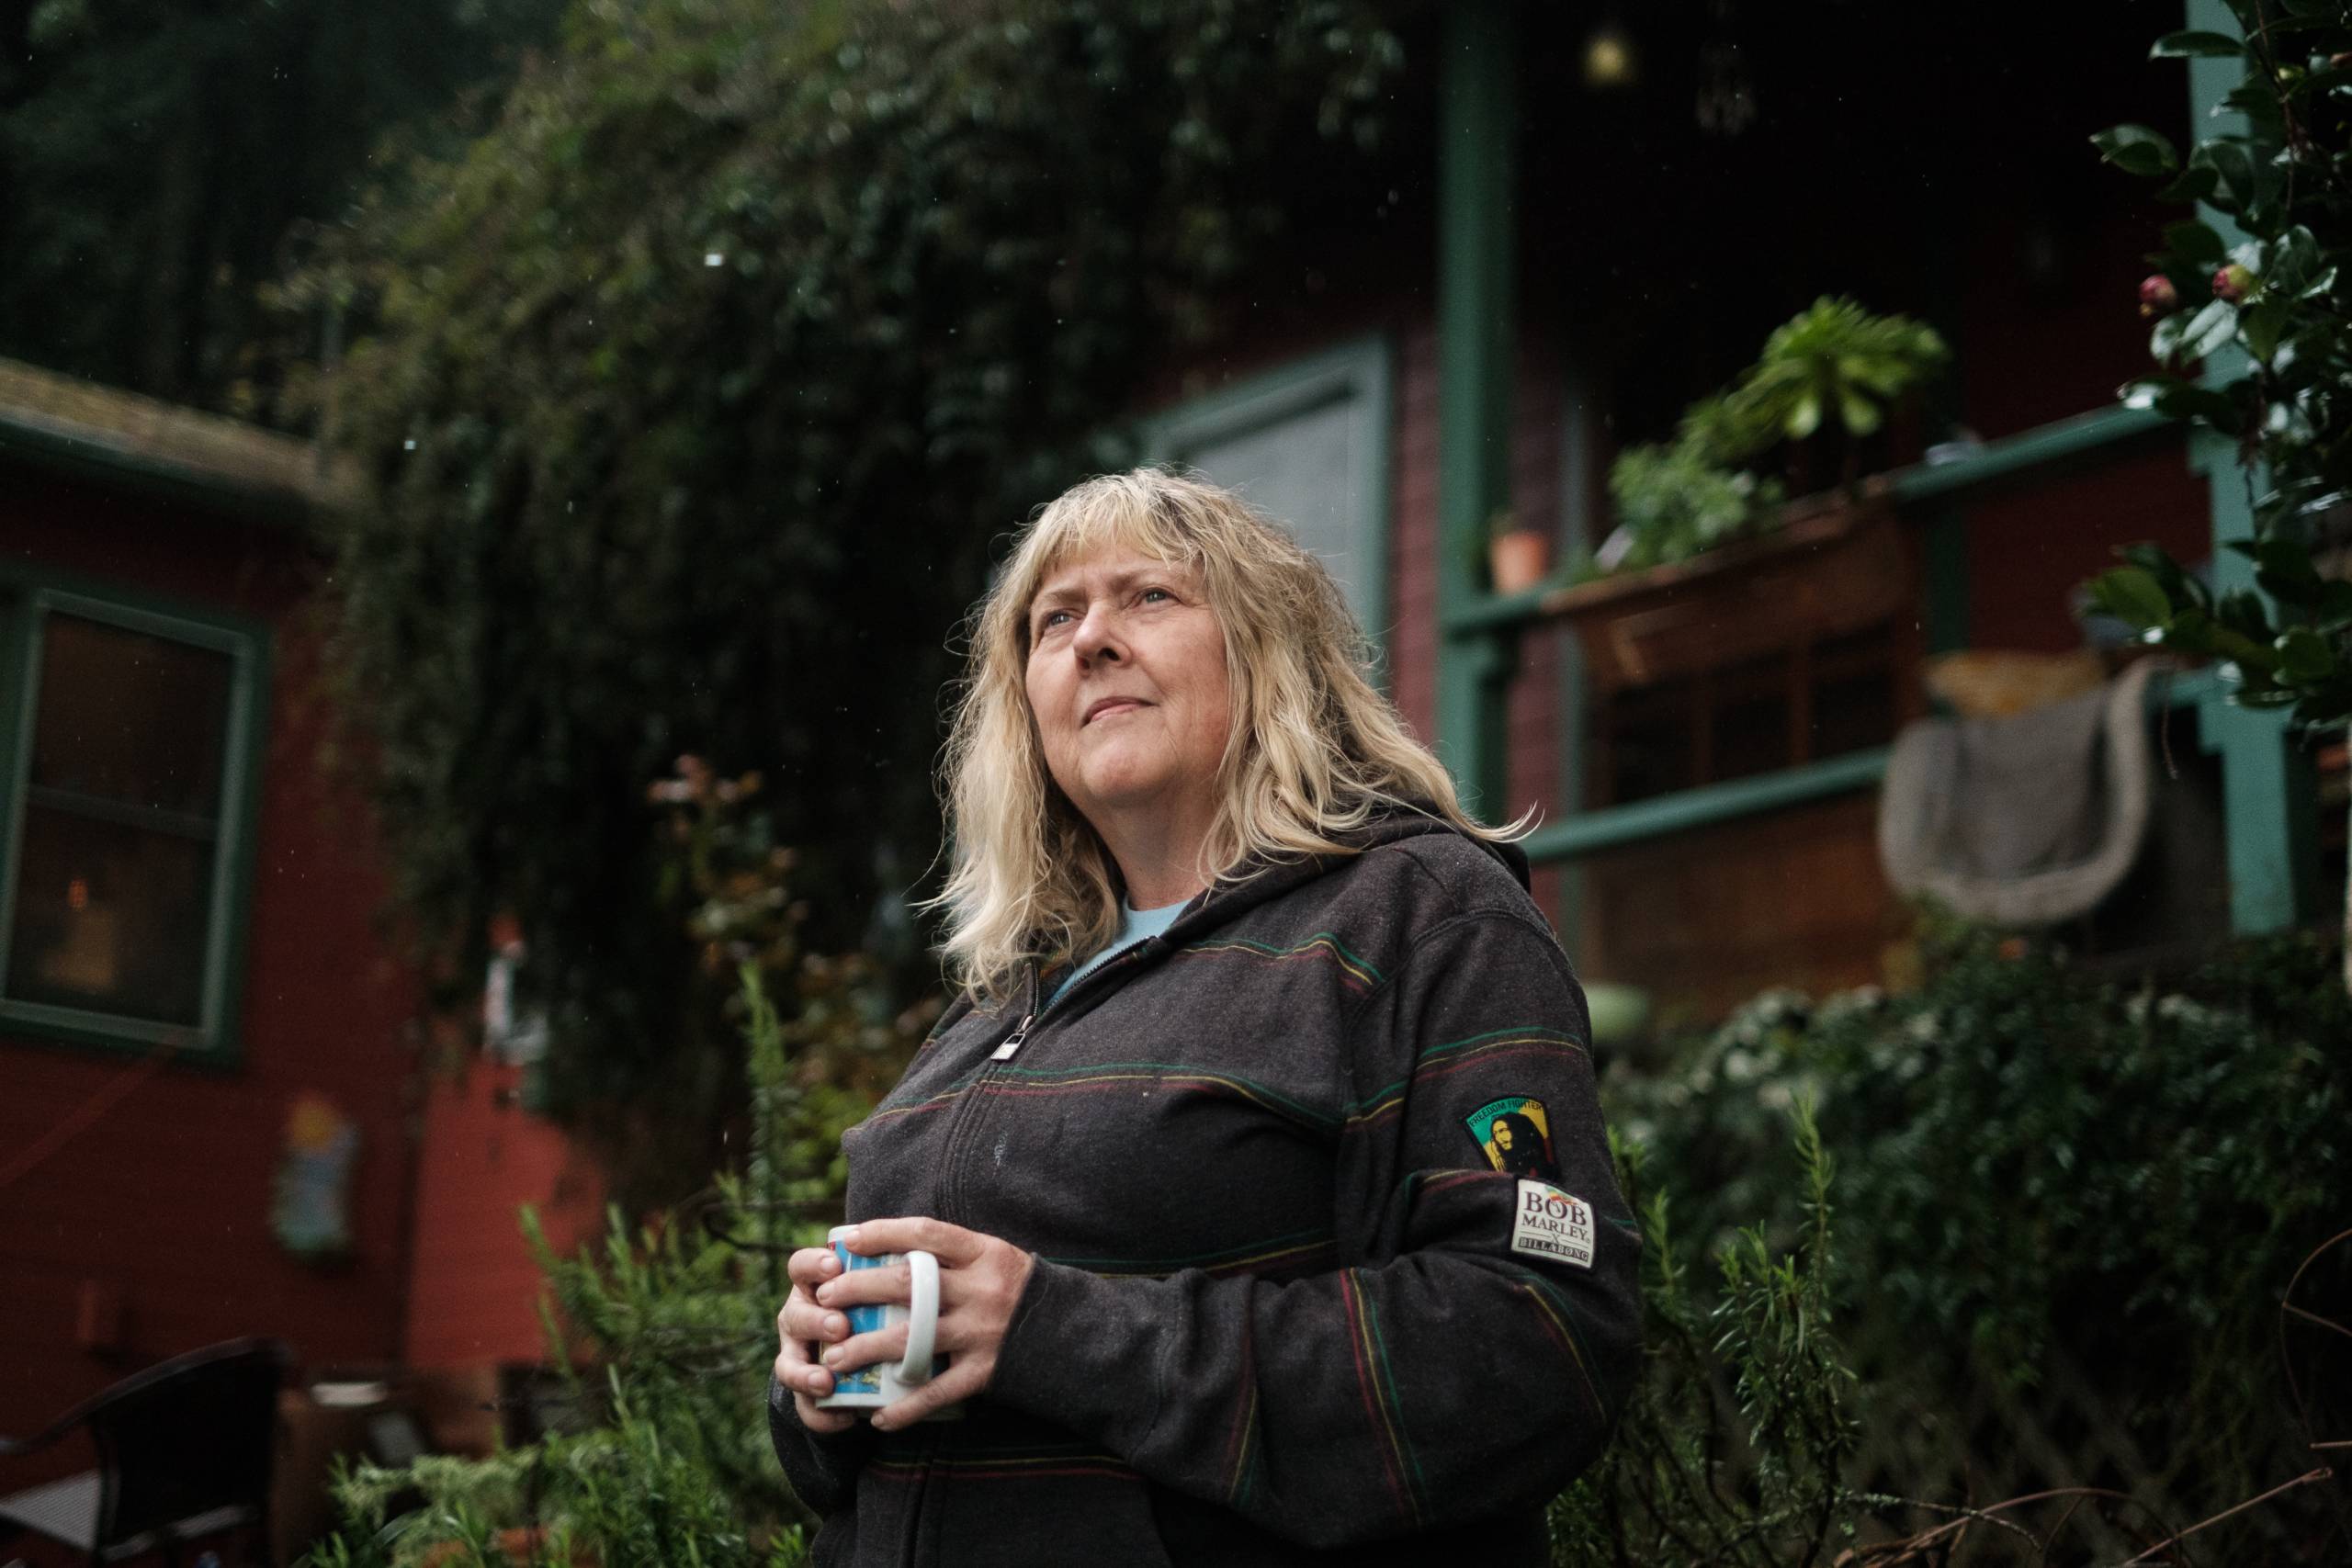 A middle aged white woman with shoulder-length blonde hair stands outside a house and looks into the distance with a mug of coffee in her hand.